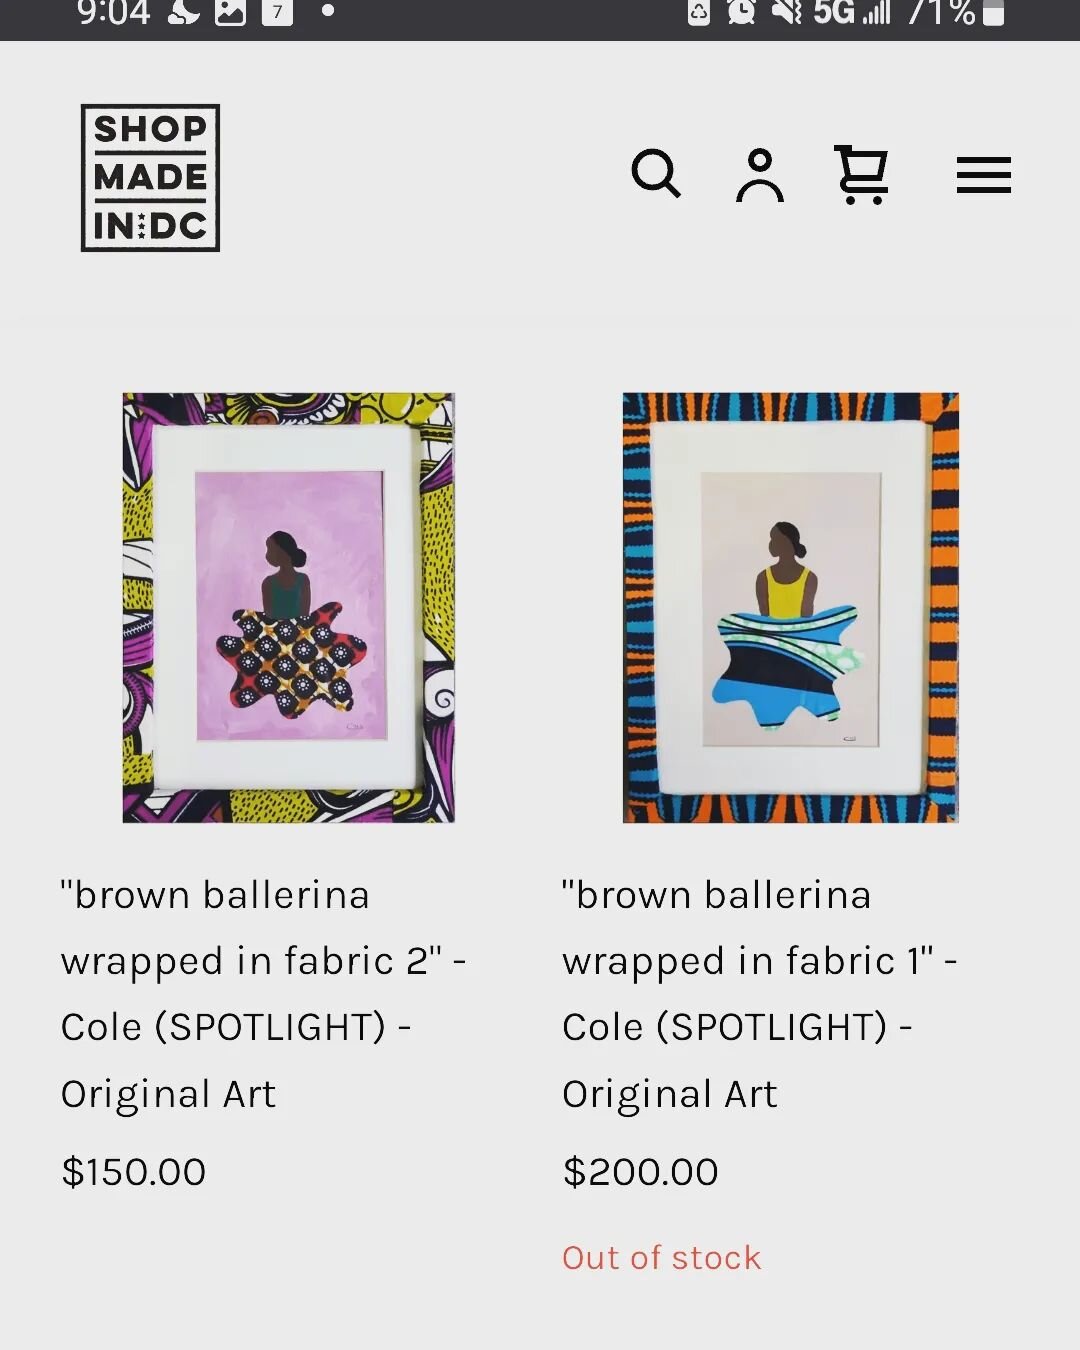 I'm so jazzed to have my work in this show online and in the @shopmadeindc #Georgetown #gallery. I've never had 10 pieces in the same show 🤓😅

#art #artist #blackart #blackartist #ballet #ballerina #fabric #collageartist #mixedmediaart #mixedmedium